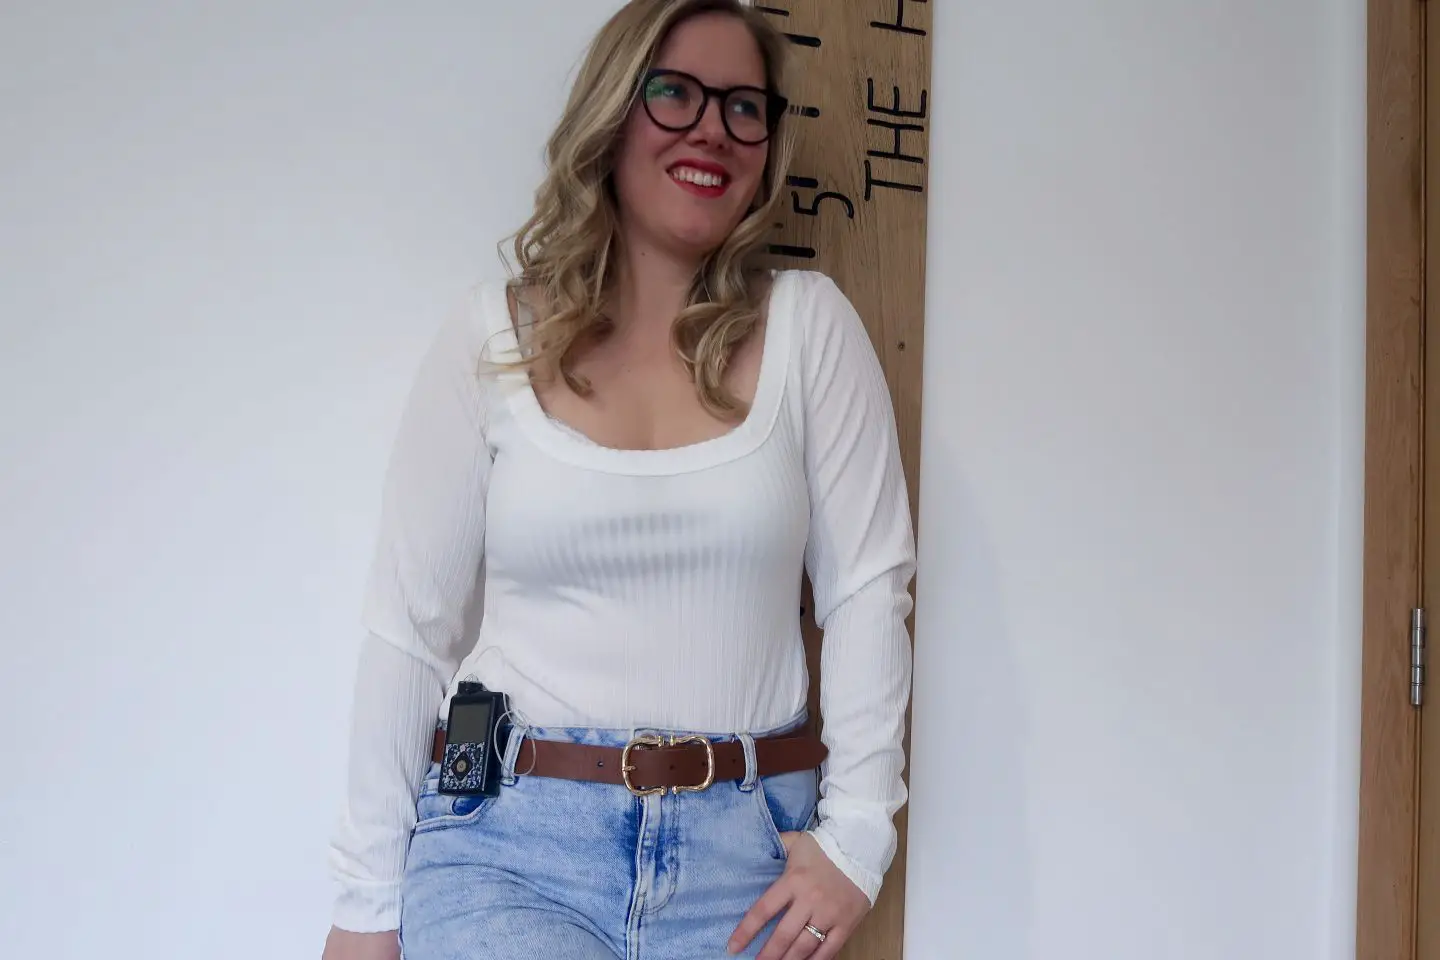 A woman wearing a cream long sleeved body suit, high waisted light denim jeans and a brown belt. She has a medtronic insulin pump clipped to her belt. She has a hand in one pocket and is smiling, looking slightly away from the camera